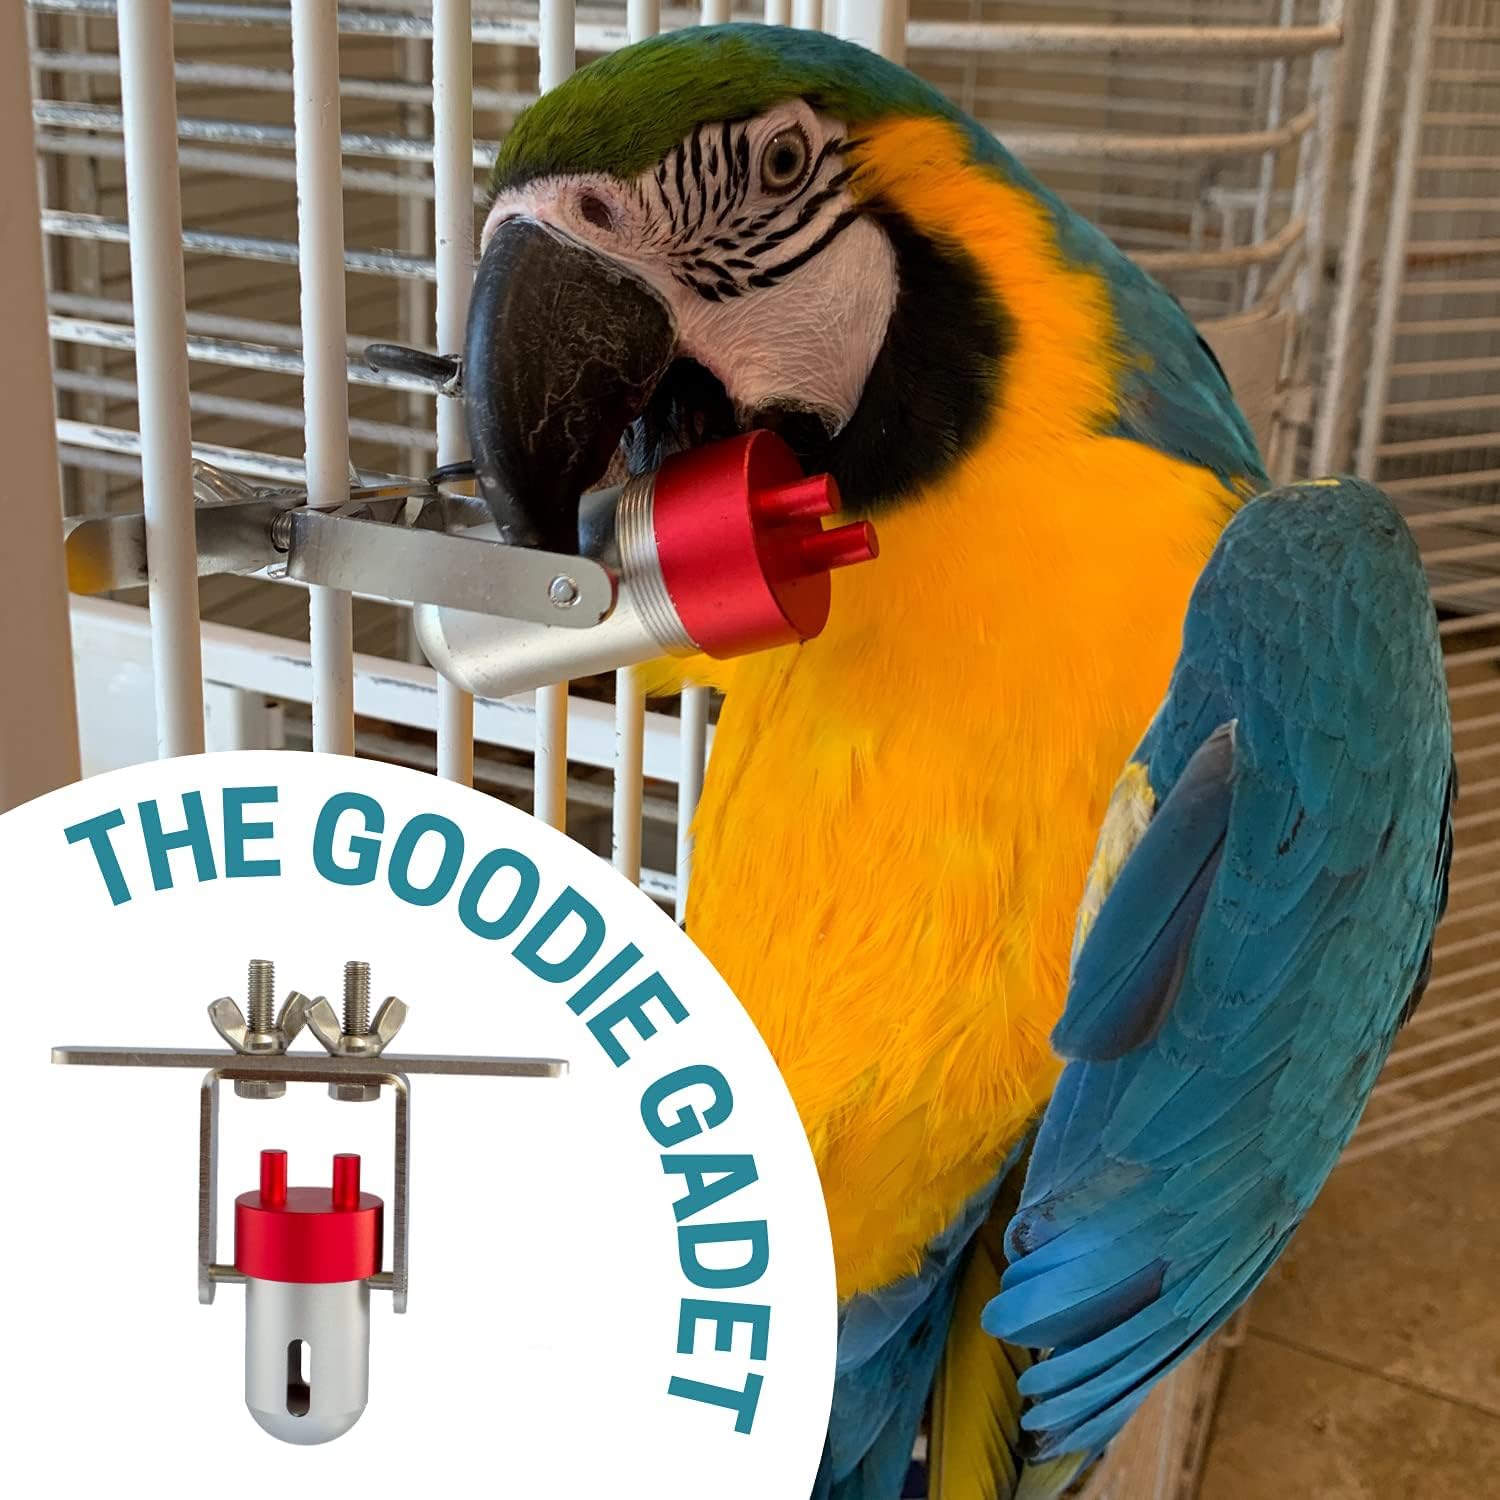 Goodie Gadget by Busy Bird